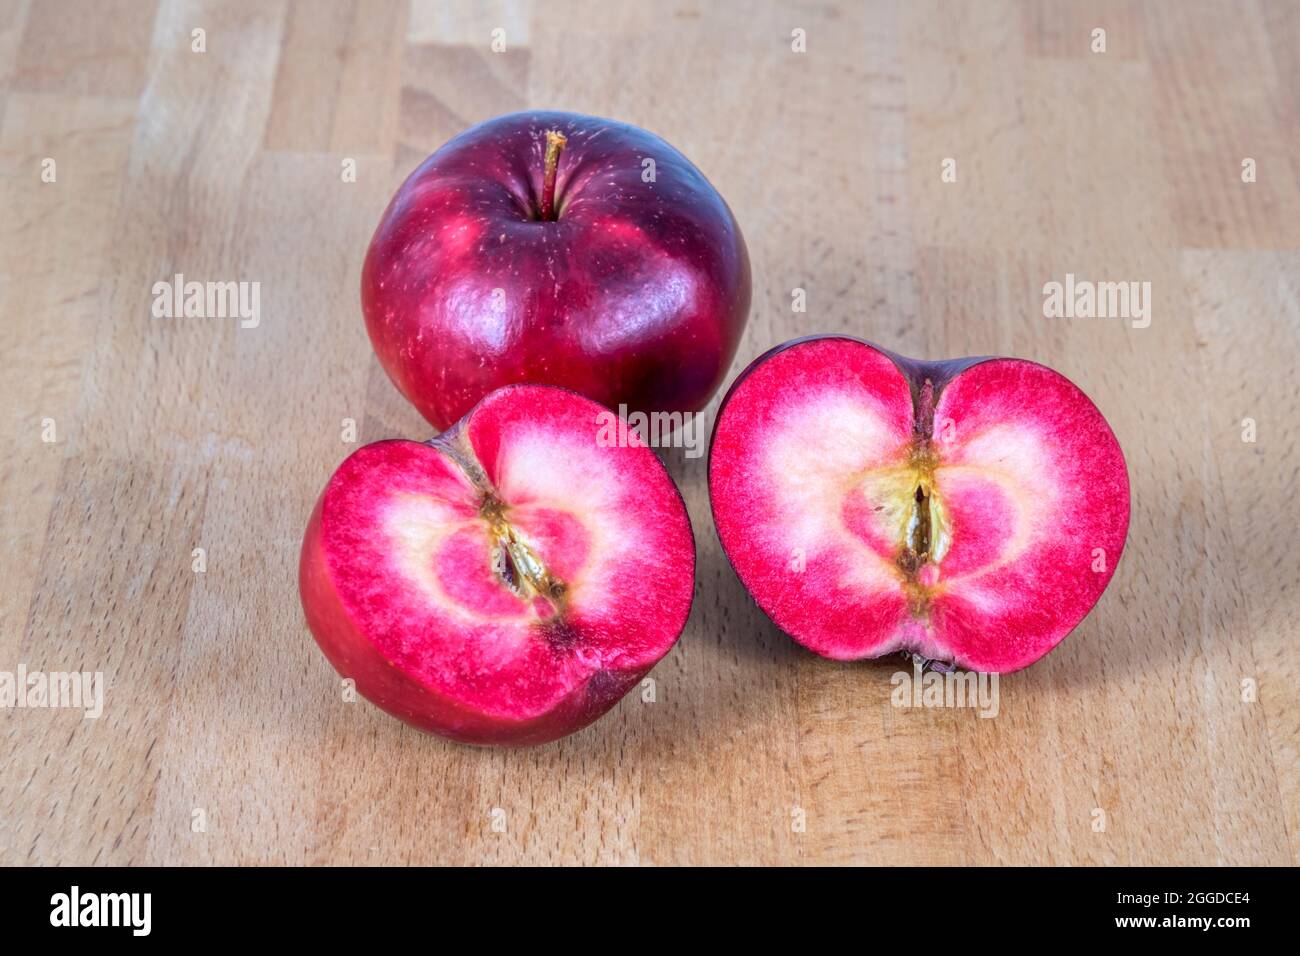 Red fleshed apples on table, one sliced to show colour of red flesh inside. Stock Photo